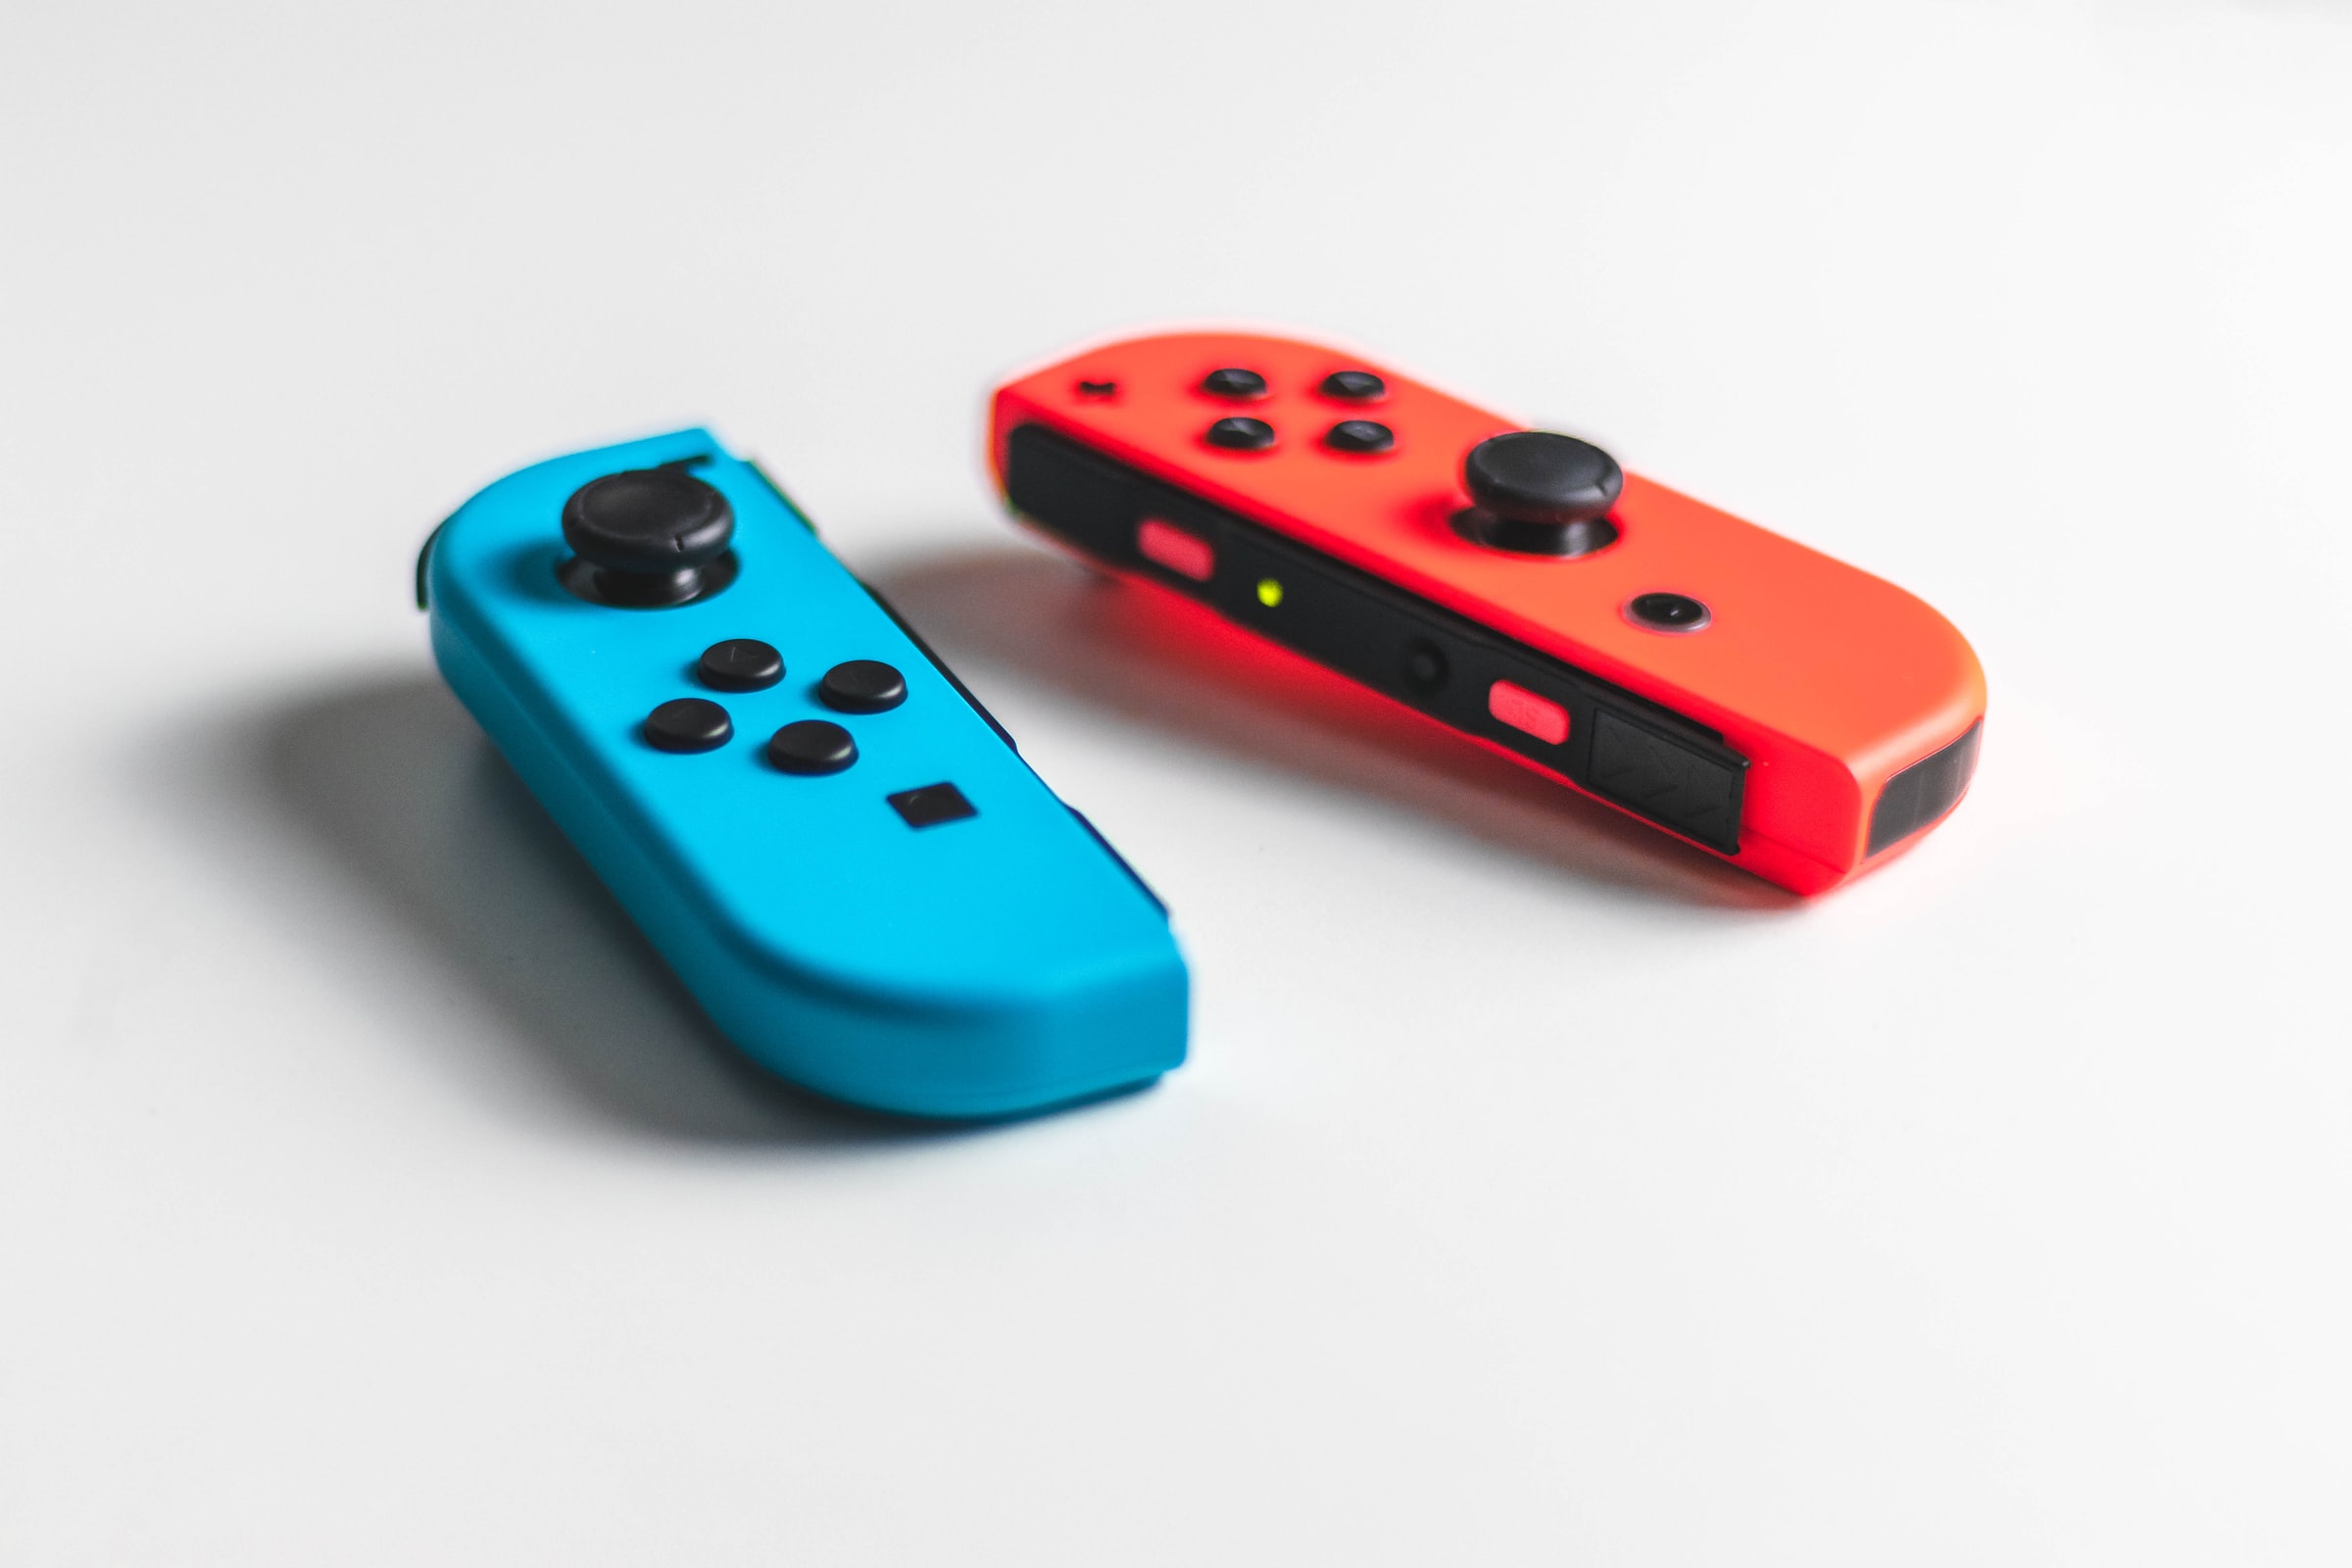 How to use Joy-Cons as a combined controller on PC